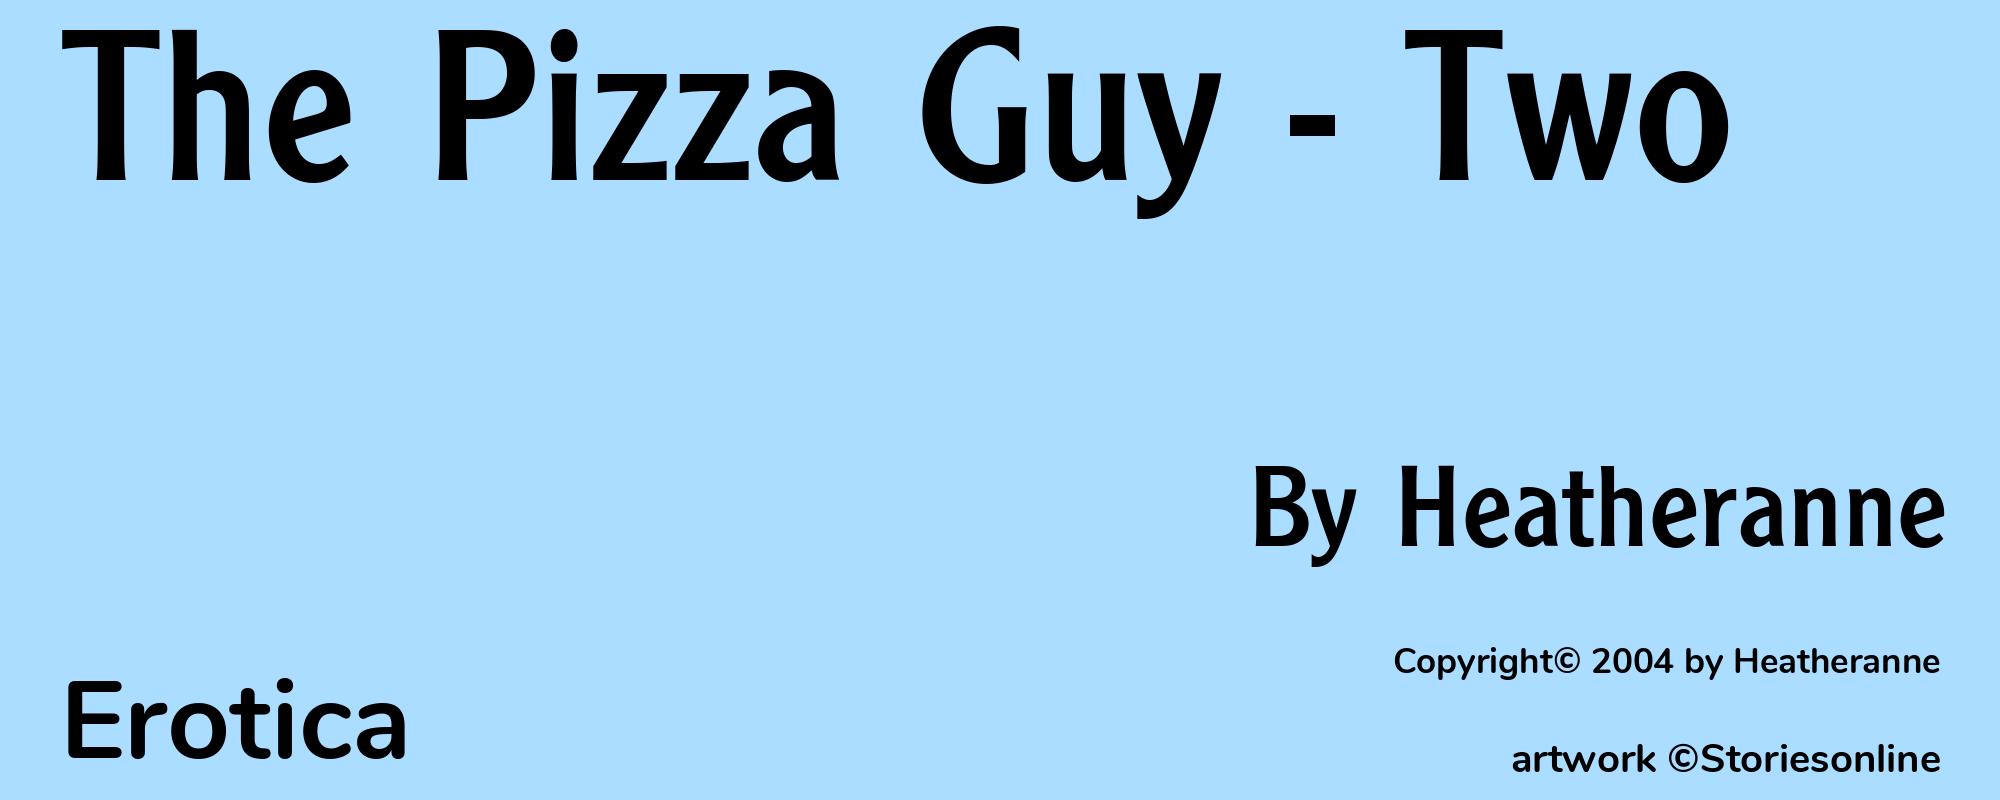 The Pizza Guy - Two - Cover